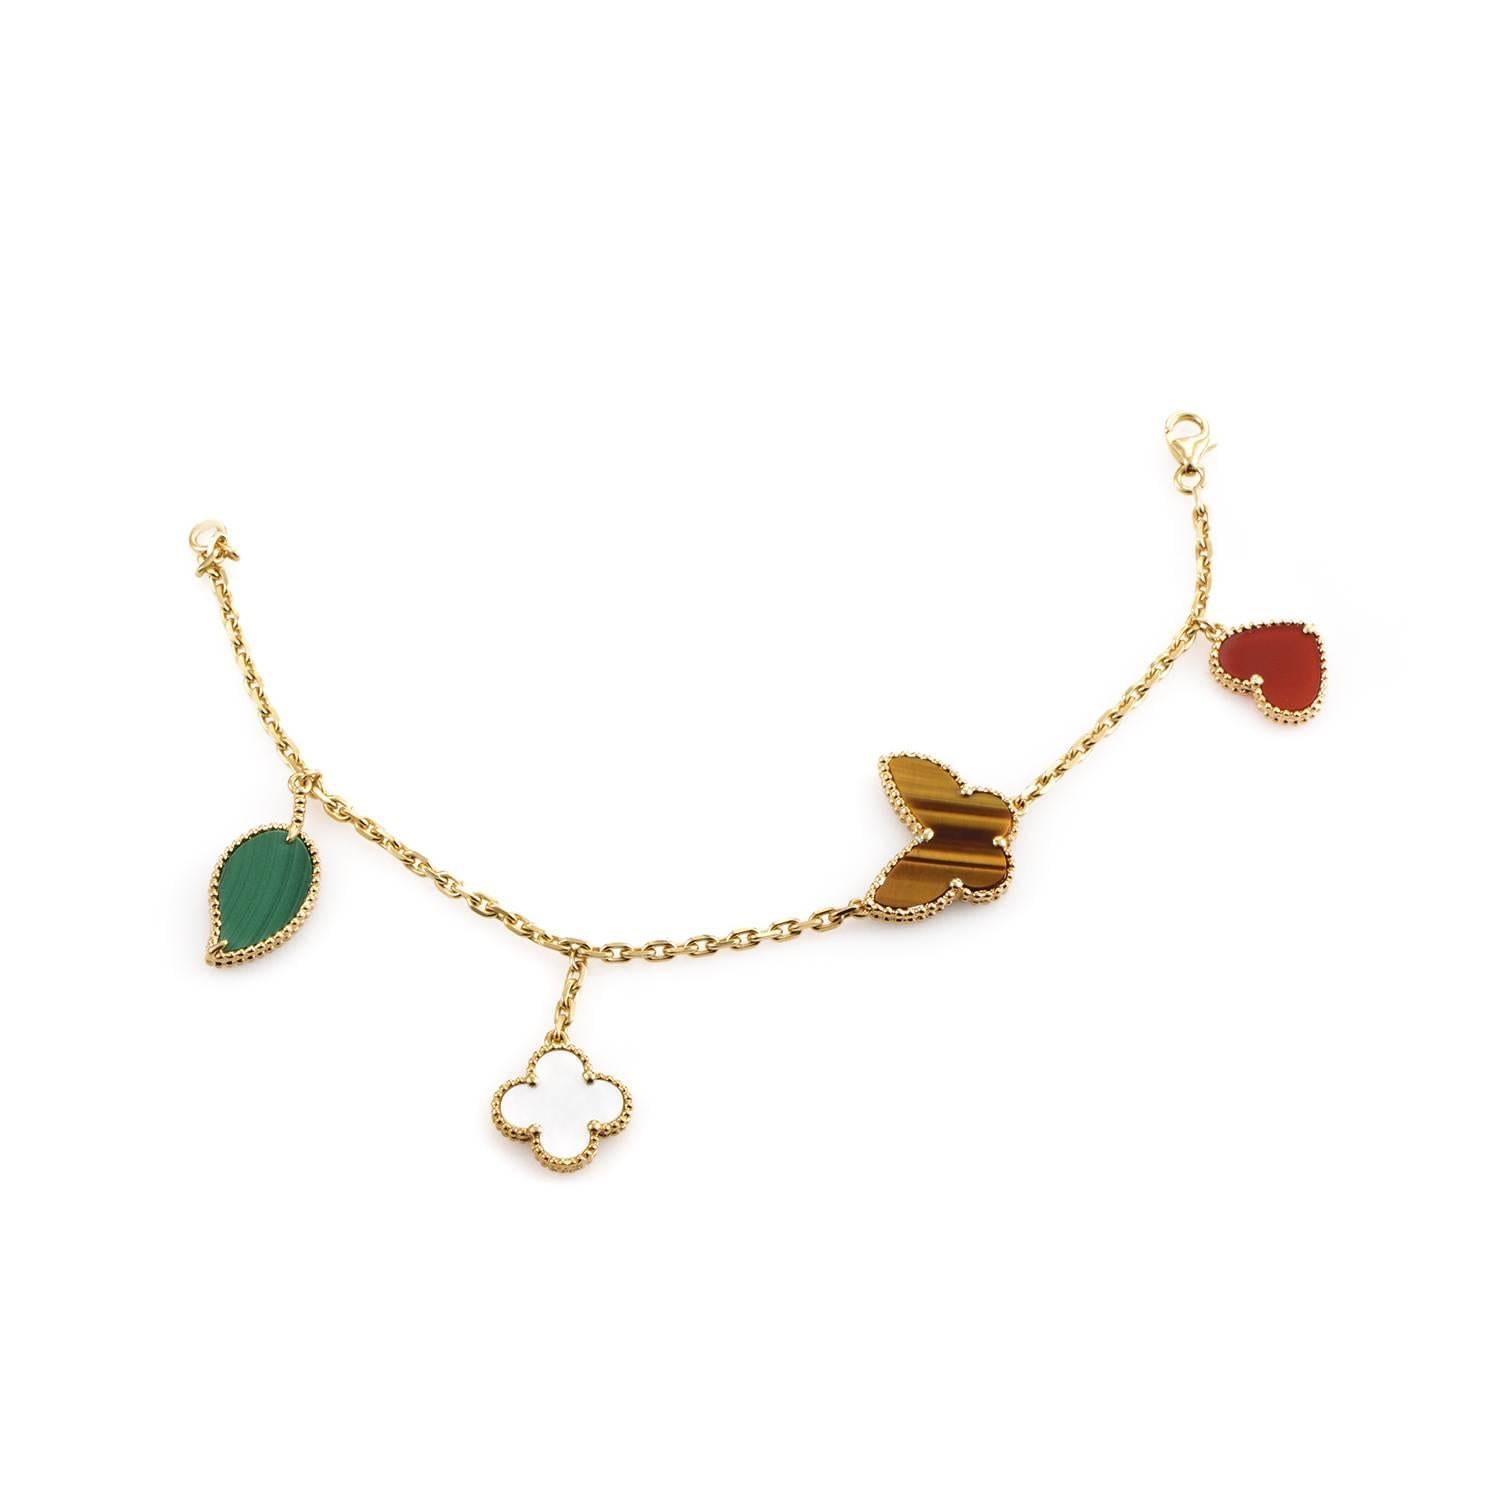 This dazzling charm bracelet from Van Cleef & Arpels Lucky Alhambra collection is absolutely adorable. The bracelet is made of 18K yellow gold and features four charms: a machinate leaf, mother of pearl Alhambra, tiger's eye butterfly, and a